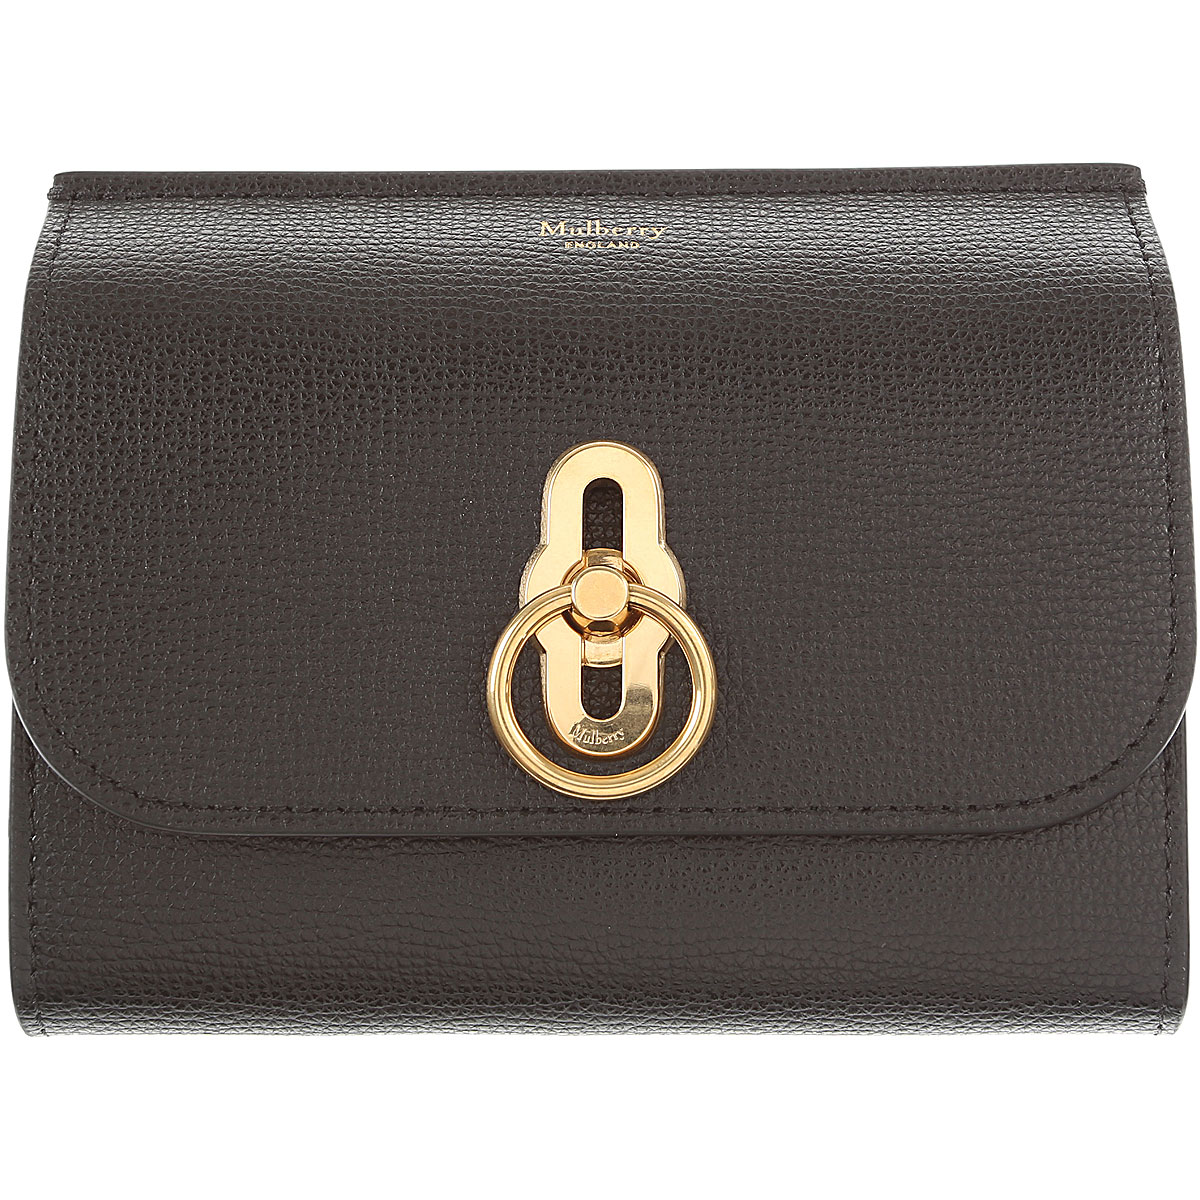 Womens Wallets Mulberry, Style code: rl5229-690a100-